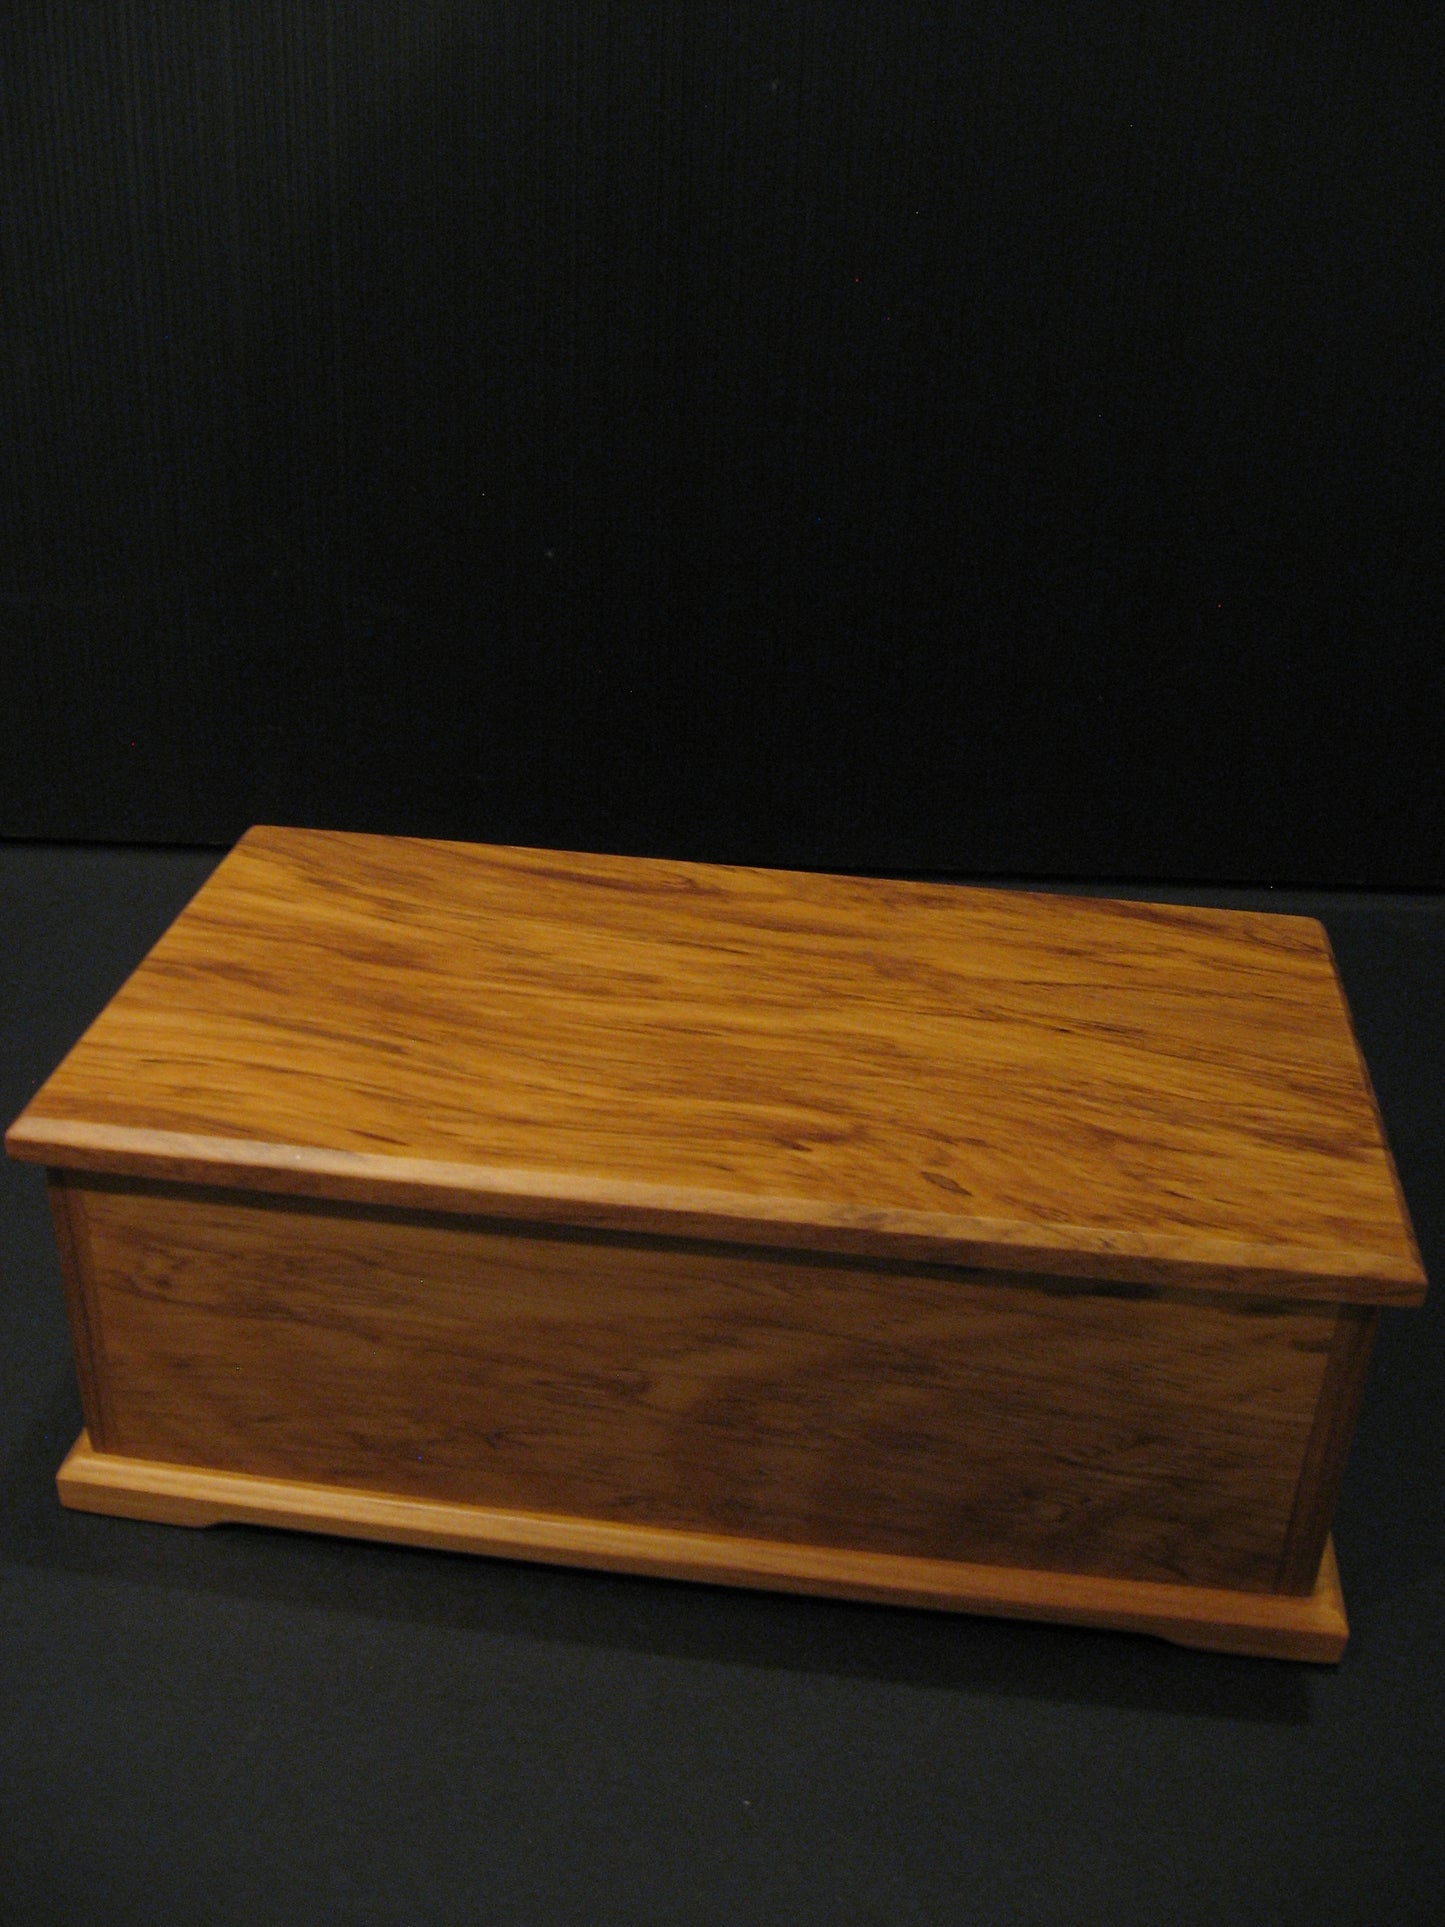 Rimu Wooden Deluxe Jewellery Box by Timber Arts NZ Silver Fern Gallery